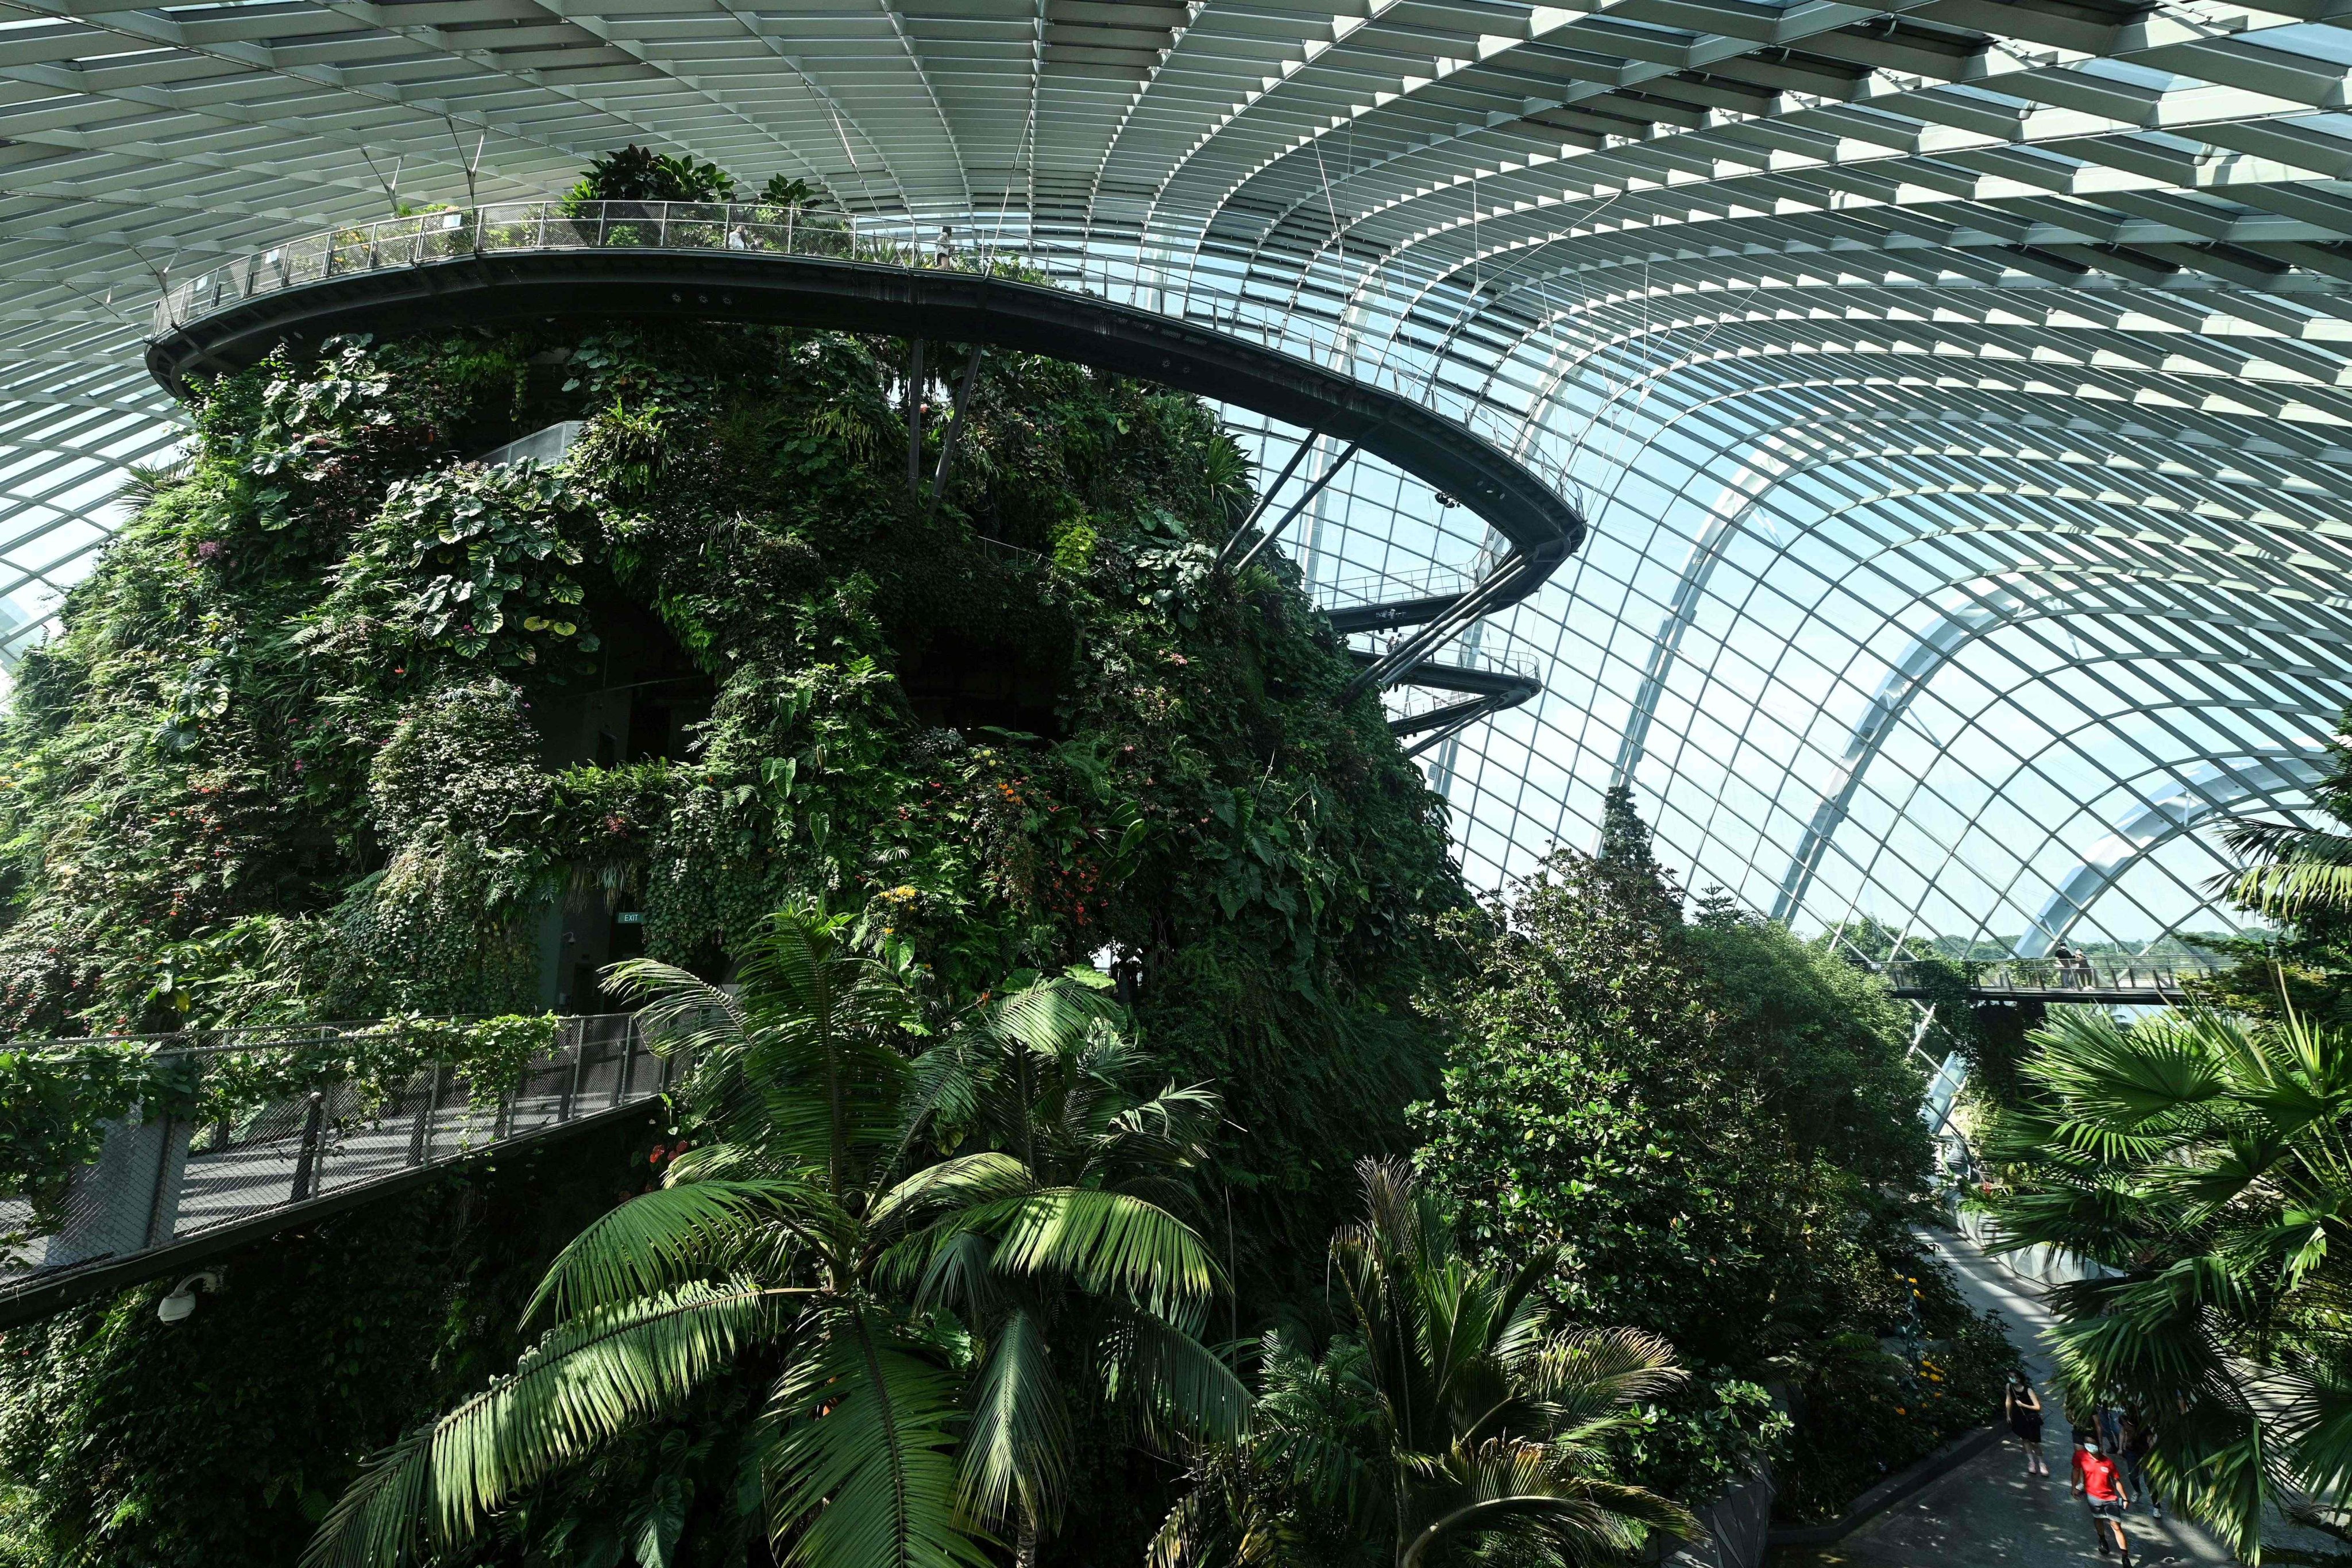 Singapore S Gardens By The Bay A New York Rooftop Farm Milan S Vertical Forests 7 Urban Green Initiatives Around The World But Are They All Worthwhile South China Morning Post